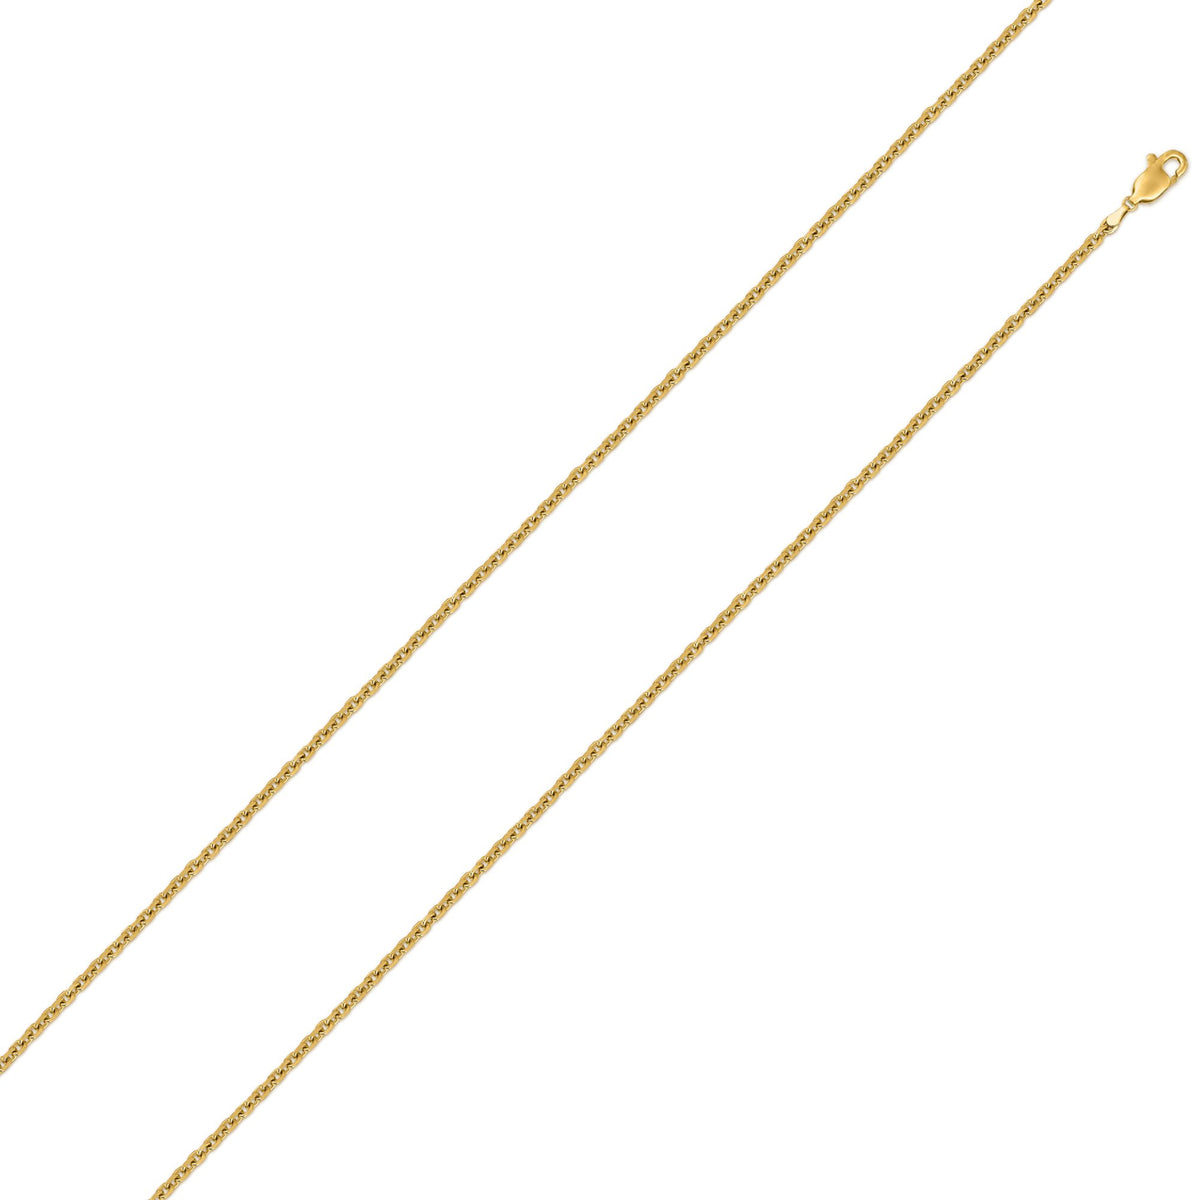 10K Yellow Gold 0.5mm Cable Diamond Cut Chain